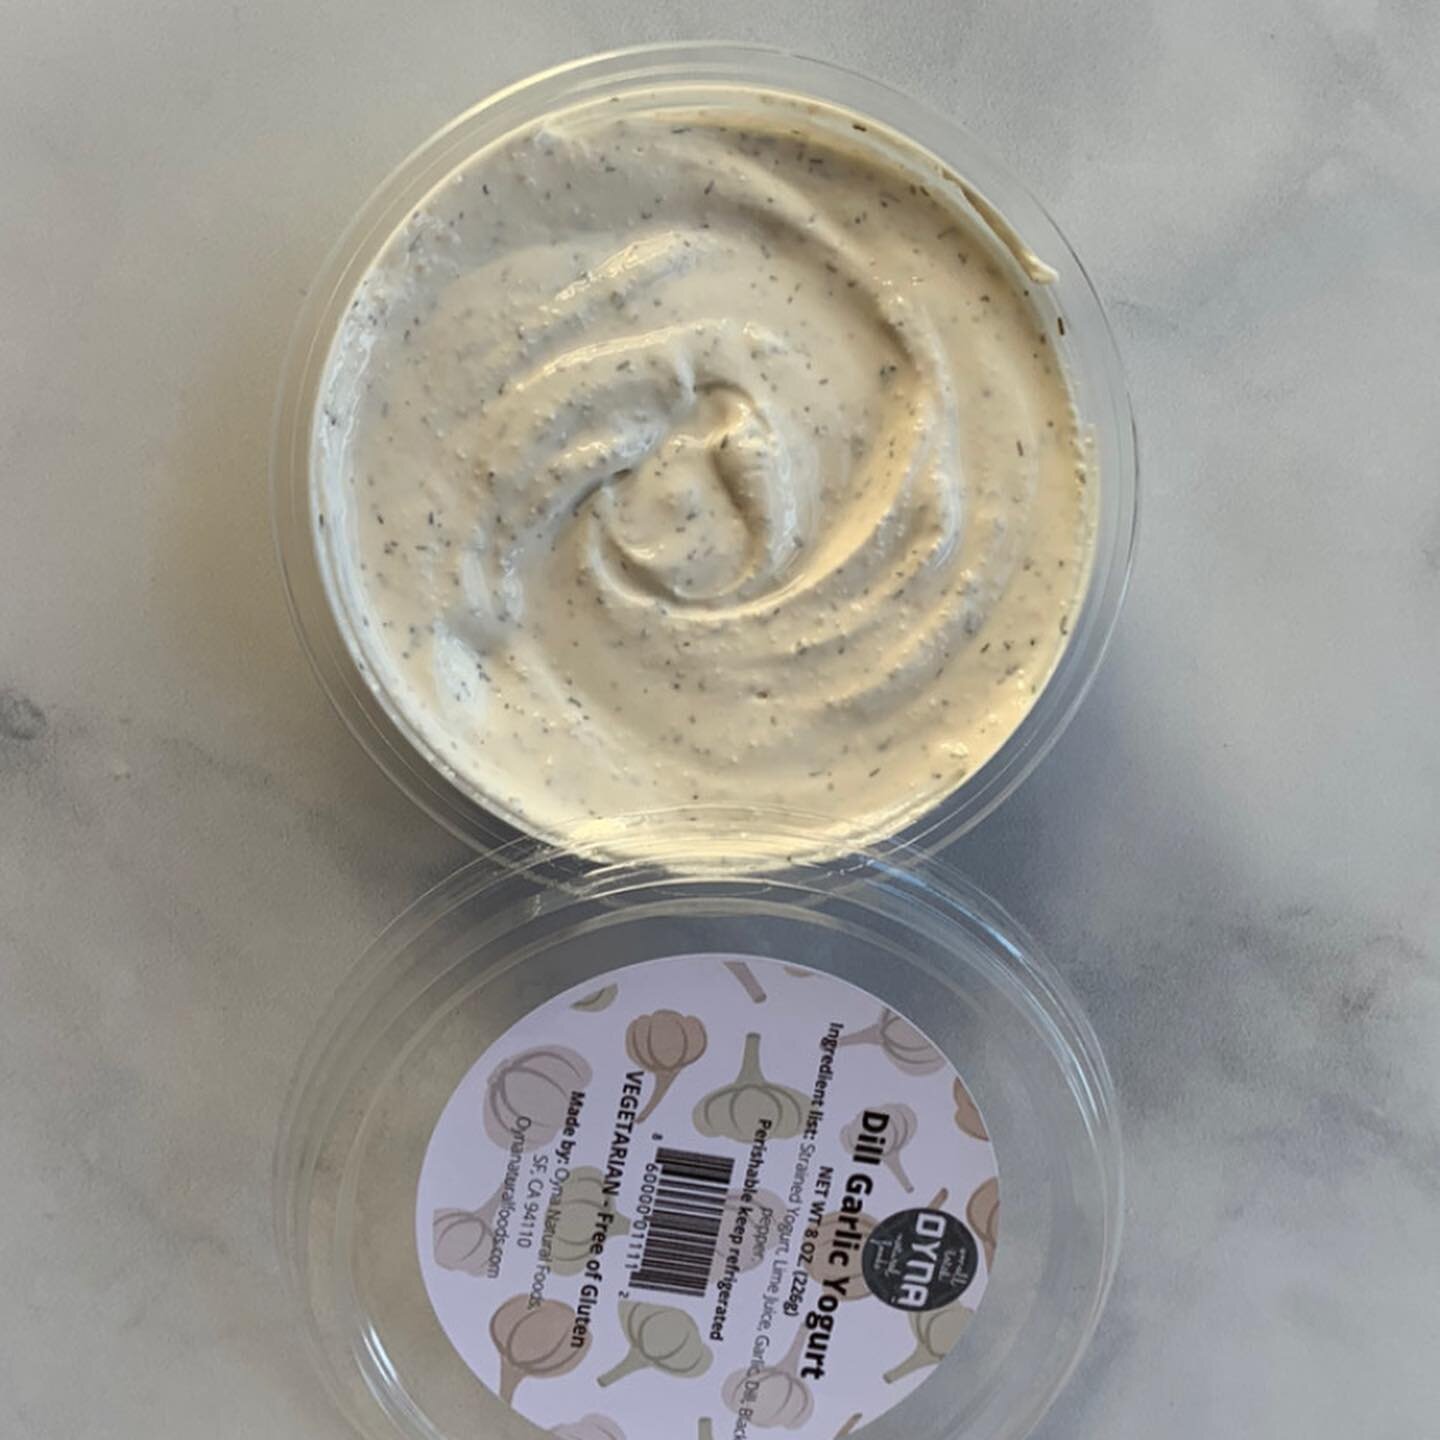 Have you ever tried our sauces/dips? These rich and delicious sauces/ dips will complement your simple meals. 
Here are some suggestions ⬇️

Dill garlic yogurt
. Dip your beard 
. In your sandwiches
. Add olive oil to make a dressing for your salad

